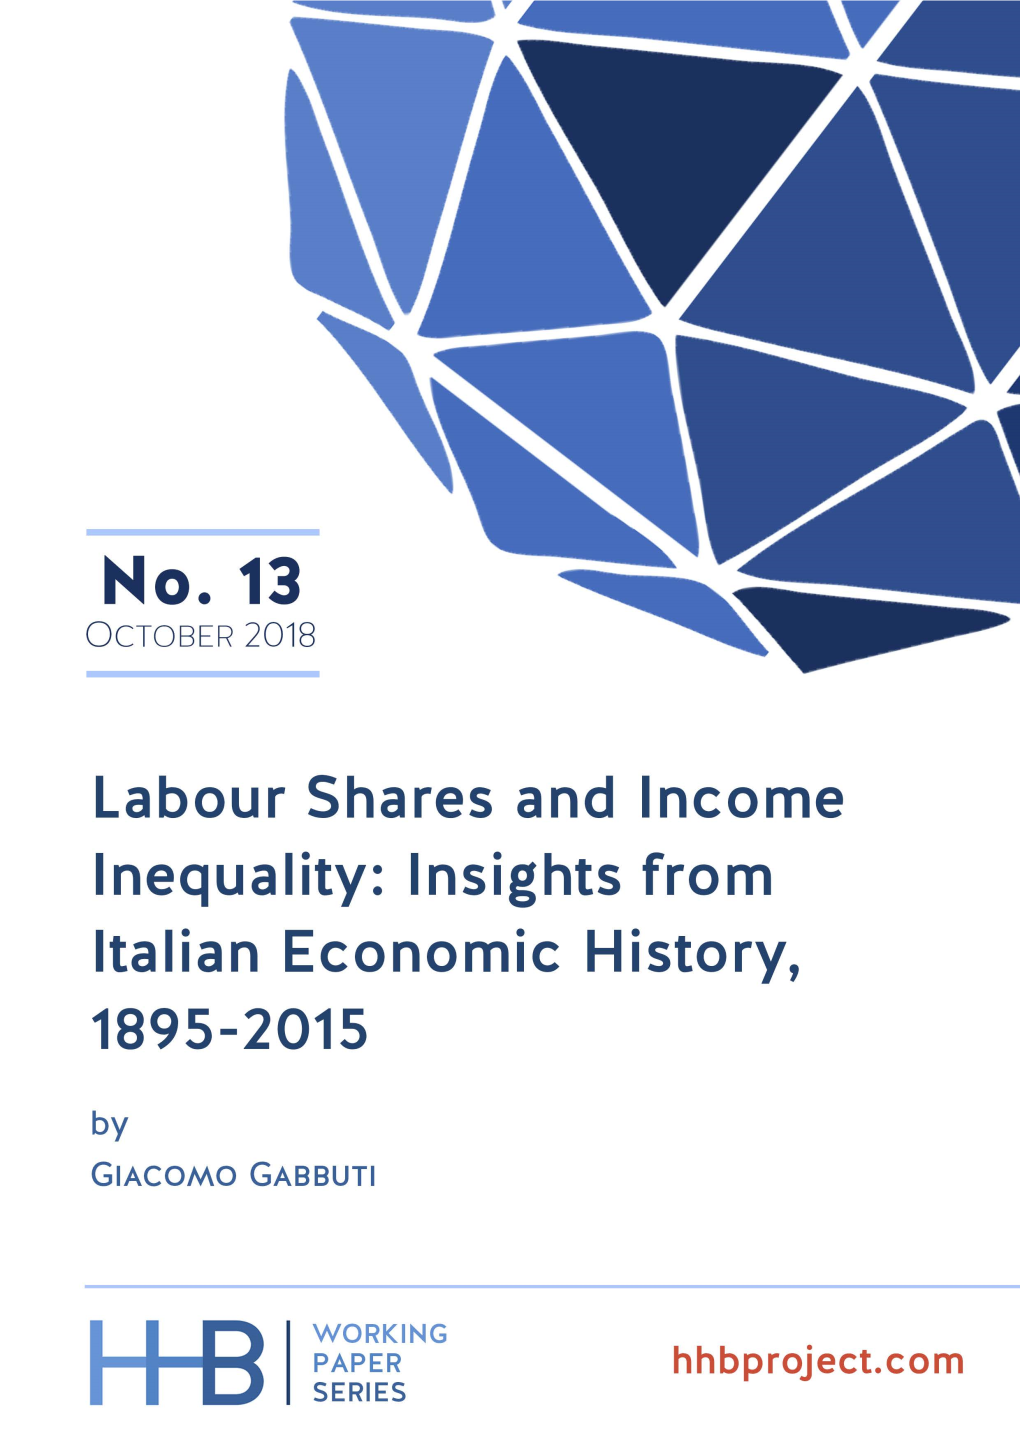 Labour Shares and Income Inequality: Insights from Italian Economic History, 1895-2015’, HHB Working Paper Series, No